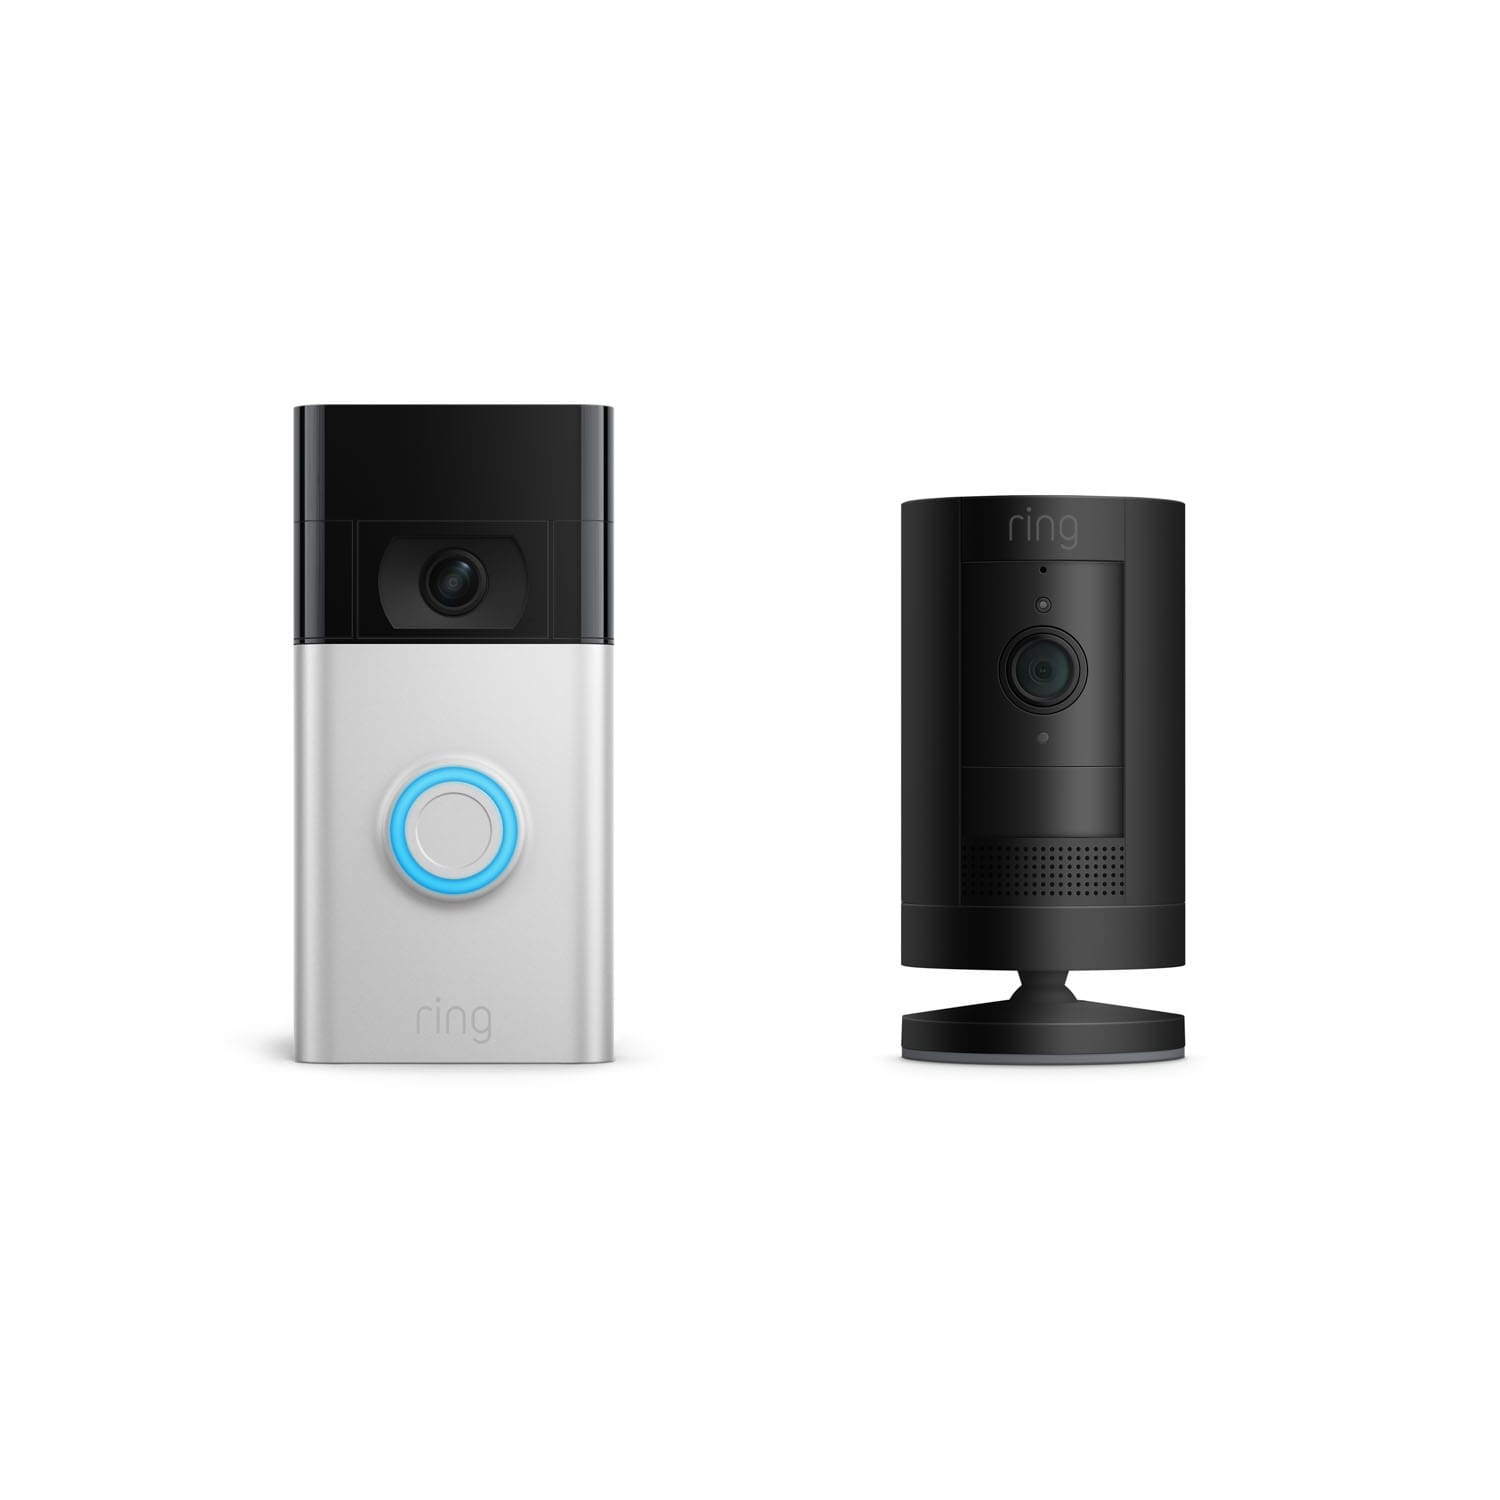 Connected Basic Kit (Video Doorbell (2nd Generation) + Stick Up Cam Battery) - Silver + Black